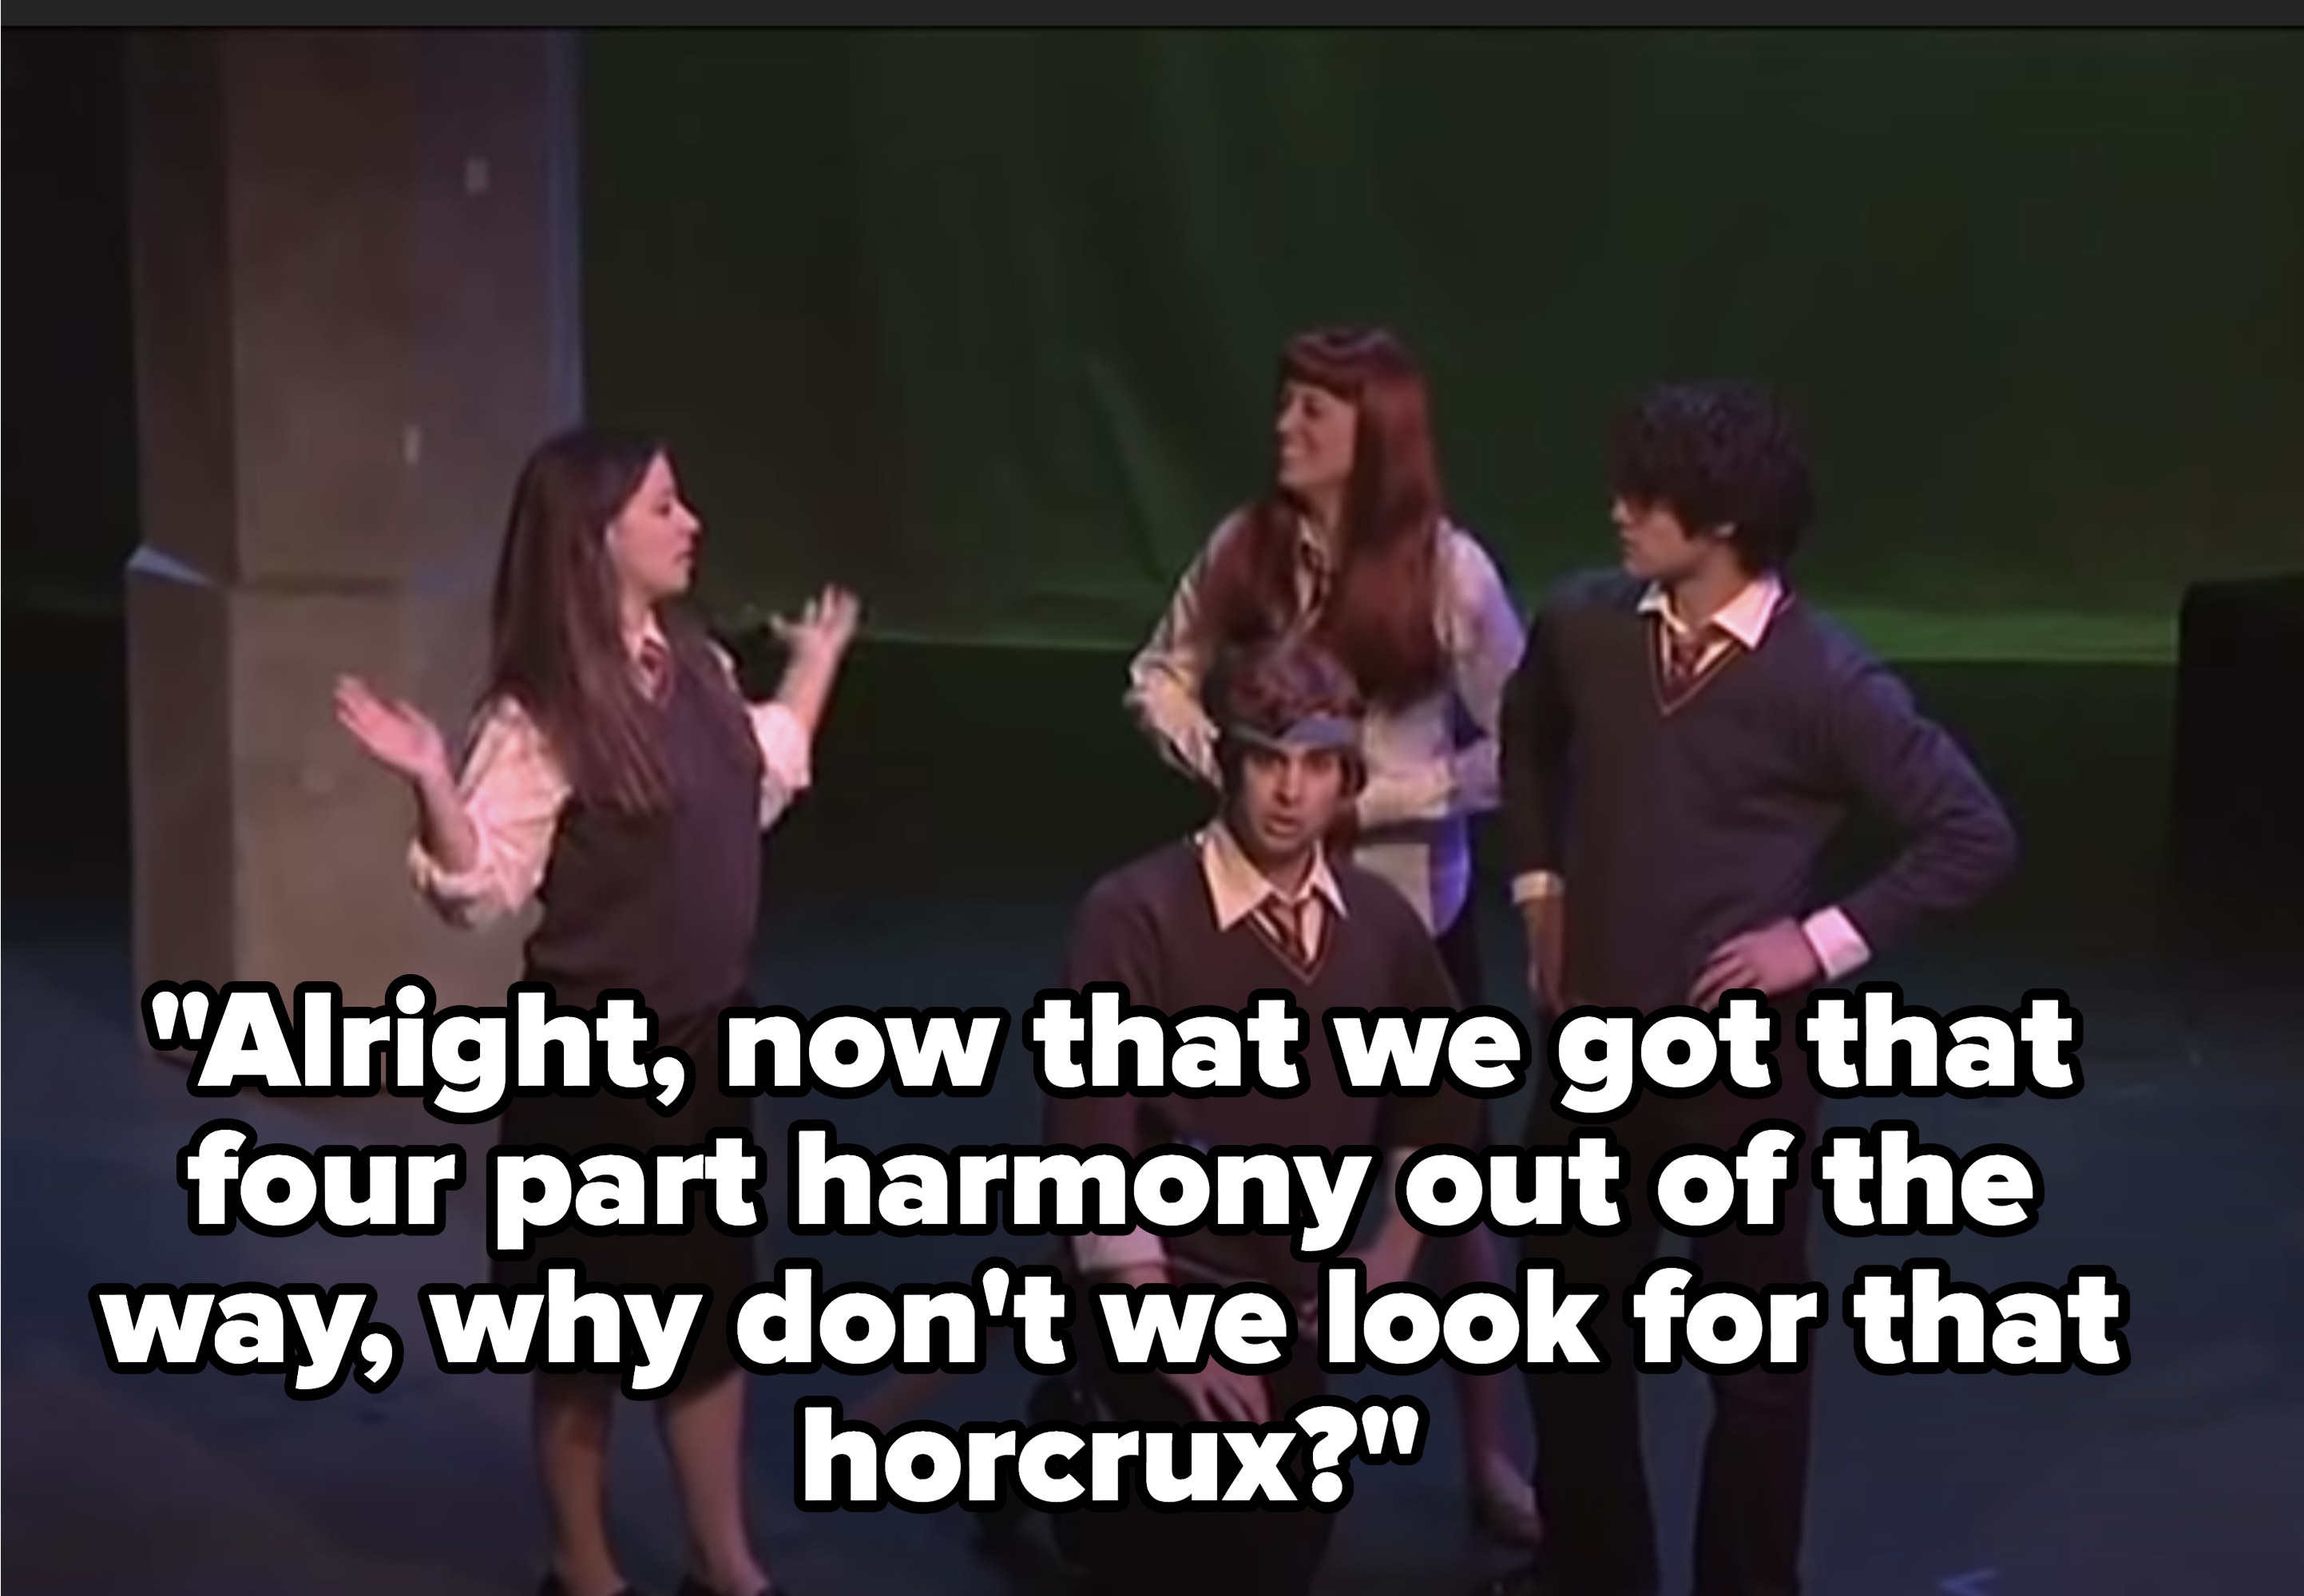 Hermione: &quot;Alright, now that we got that four part harmony out of the way, why don&#x27;t we look for that horcrux?&quot;